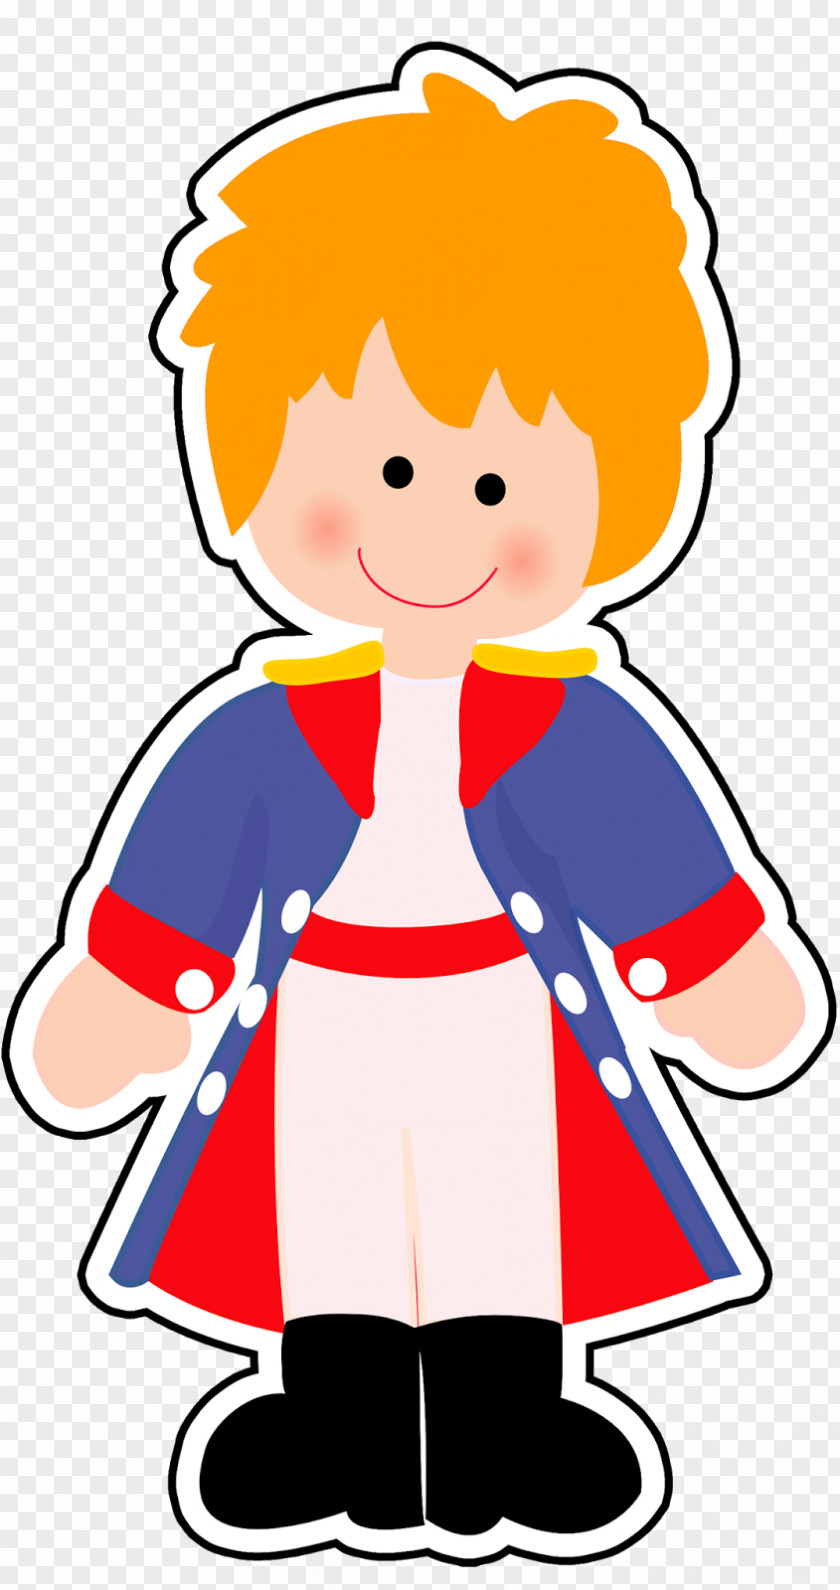 Illustration Little Prince The Drawing Clip Art PNG